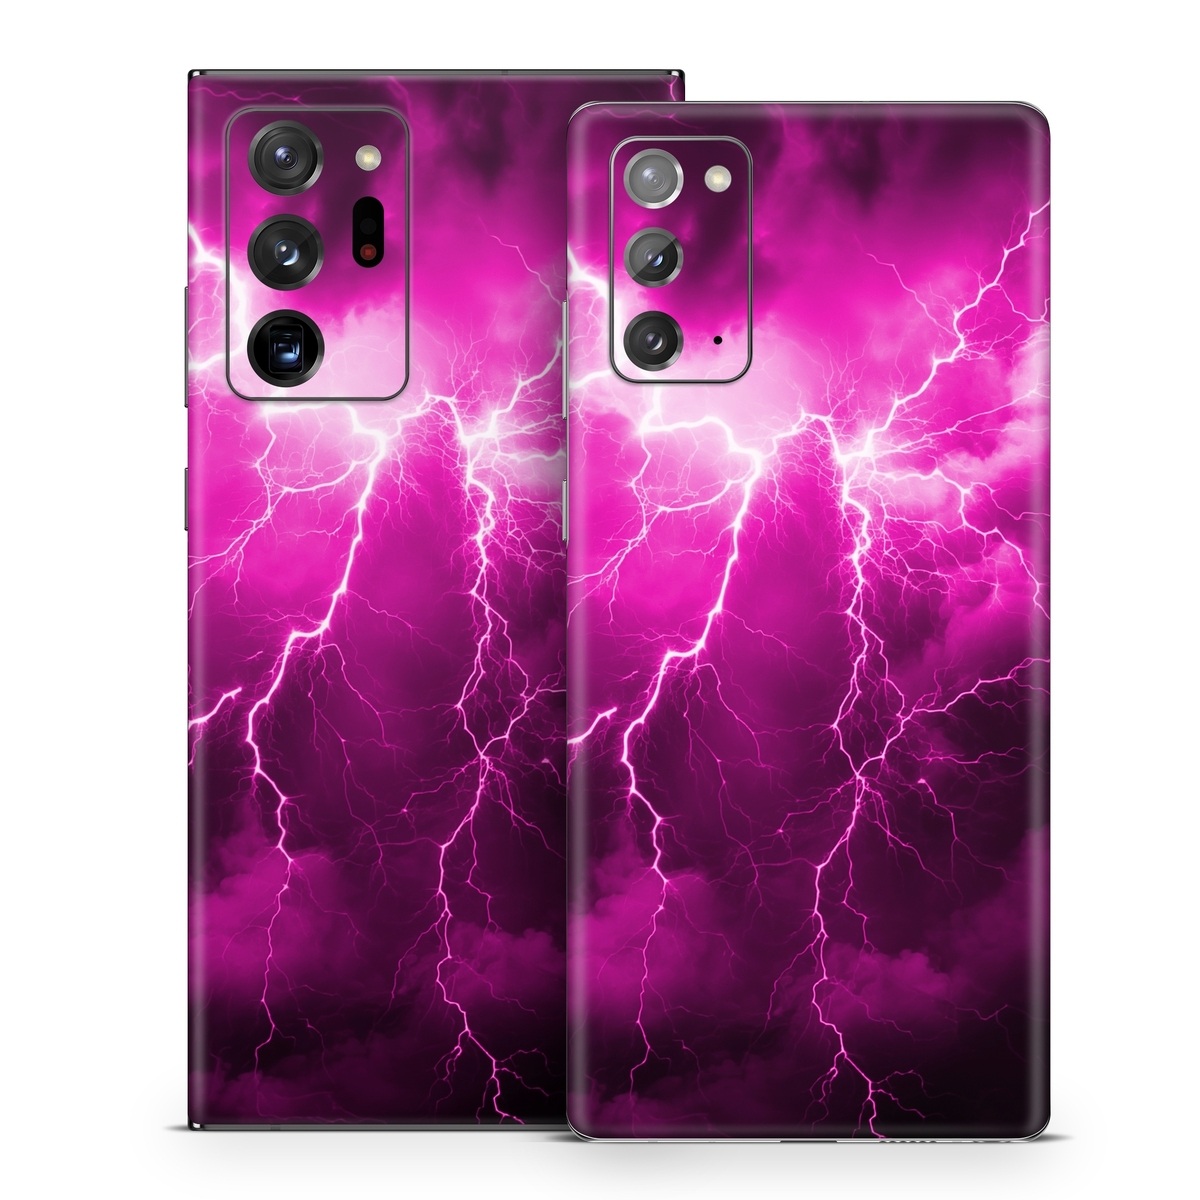  Skin design of Sky, Thunder, Lightning, Thunderstorm, Atmosphere, White, Purple, Light, Nature, Water, with black, pink colors